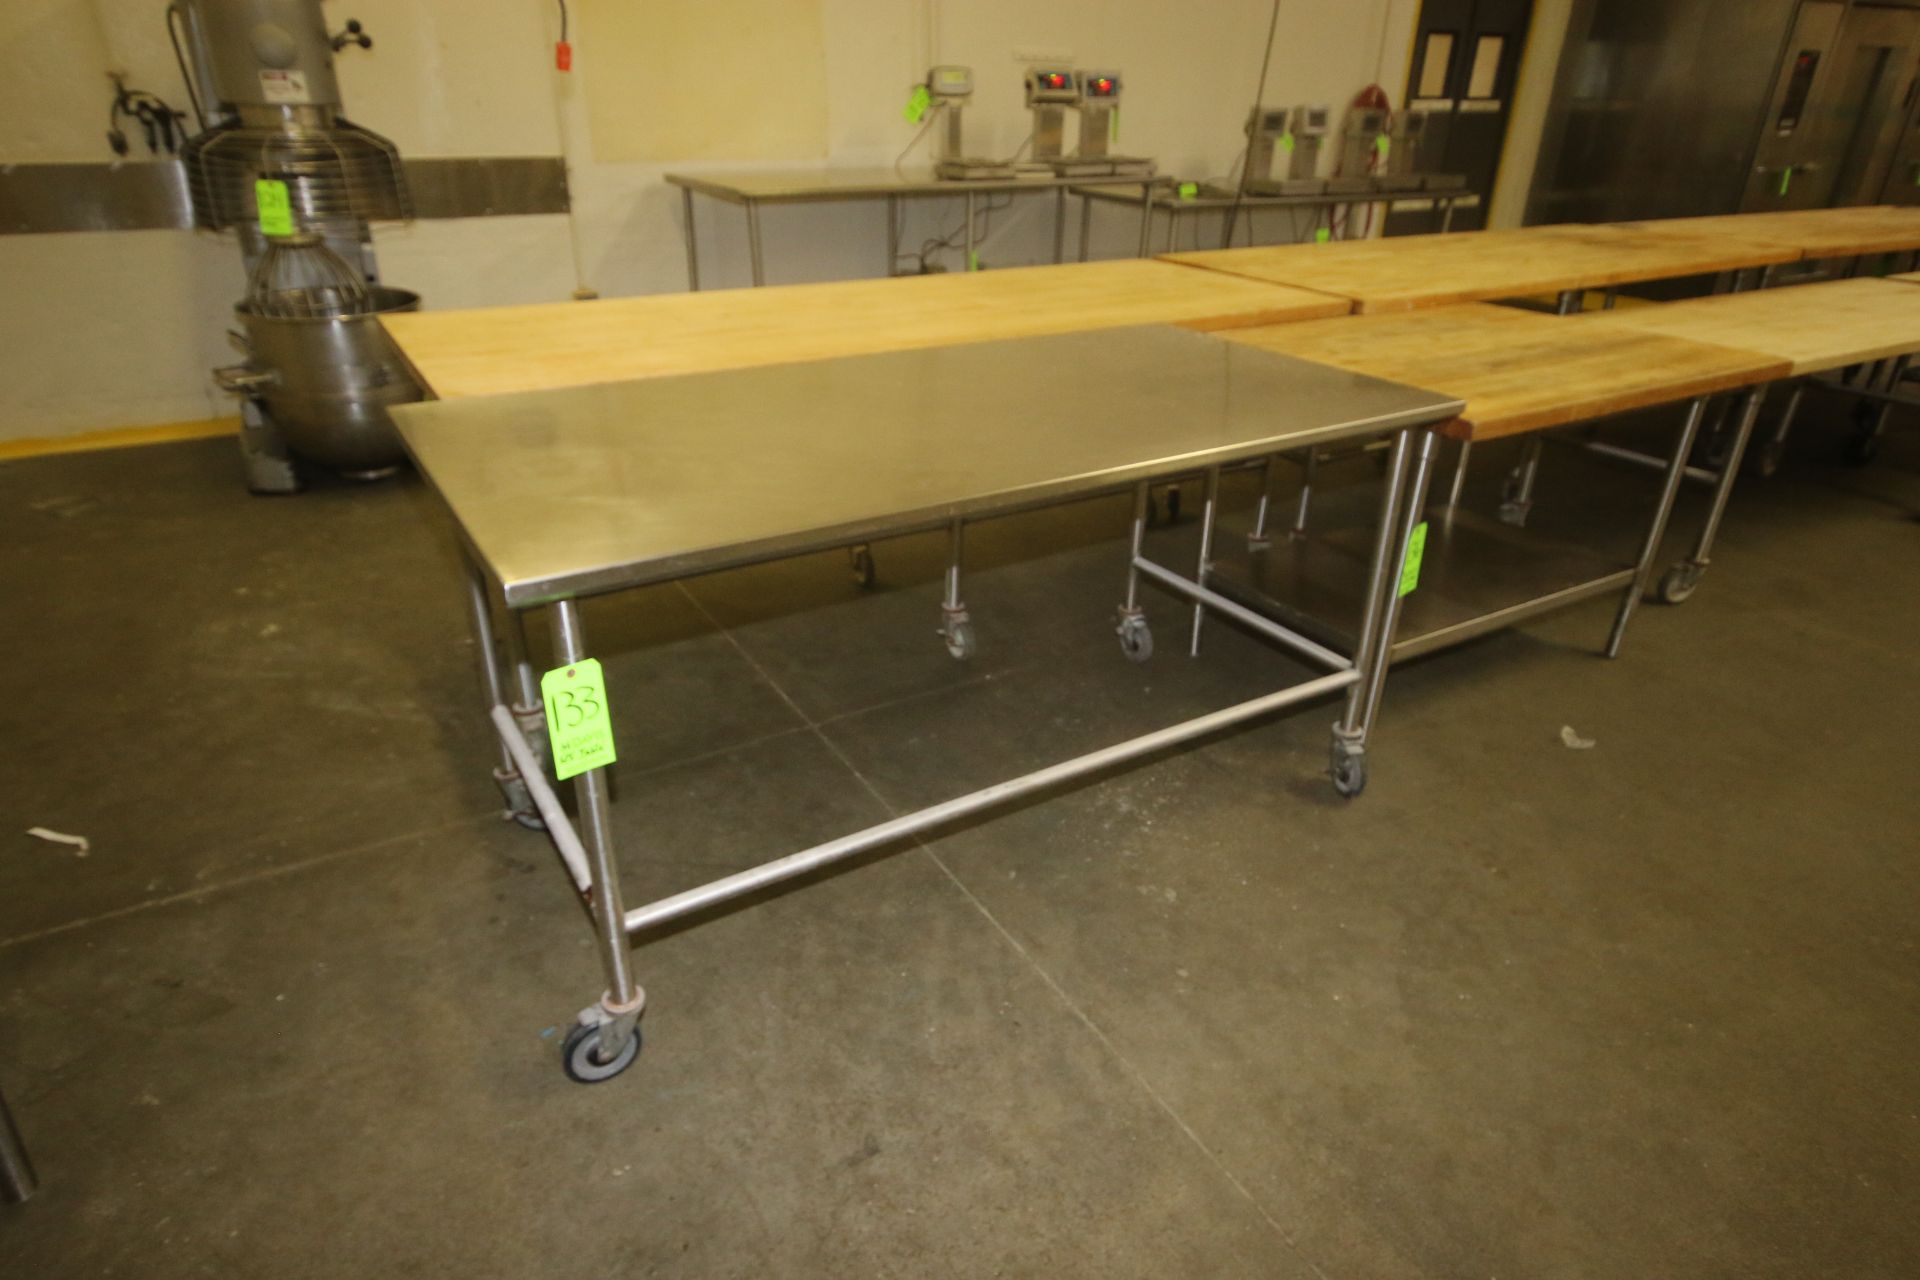 S/S Portable Table, Overall Dims.: Aprox. 72" L x 36" W x 36" H, Mounted on S/S Portable Frame ( - Image 2 of 2